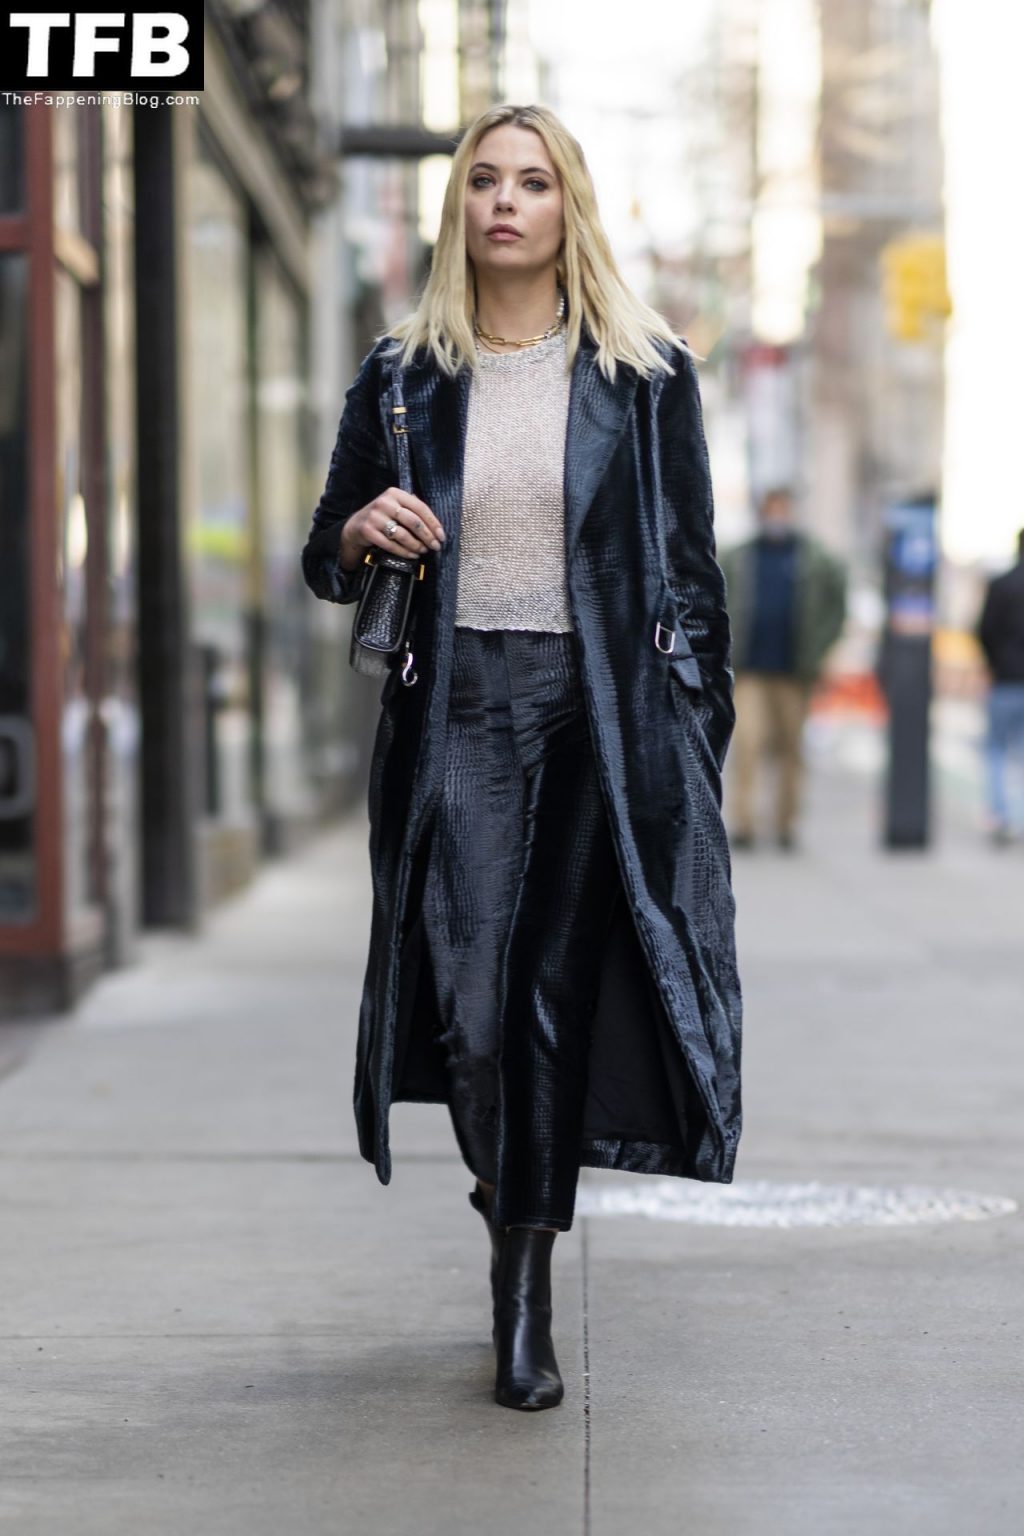 Ashley Benson Sexy The Fappening Blog 8 1024x1536 - Braless Ashley Benson Looks Stylish While Heading to a Meeting in NYC (20 Photos)